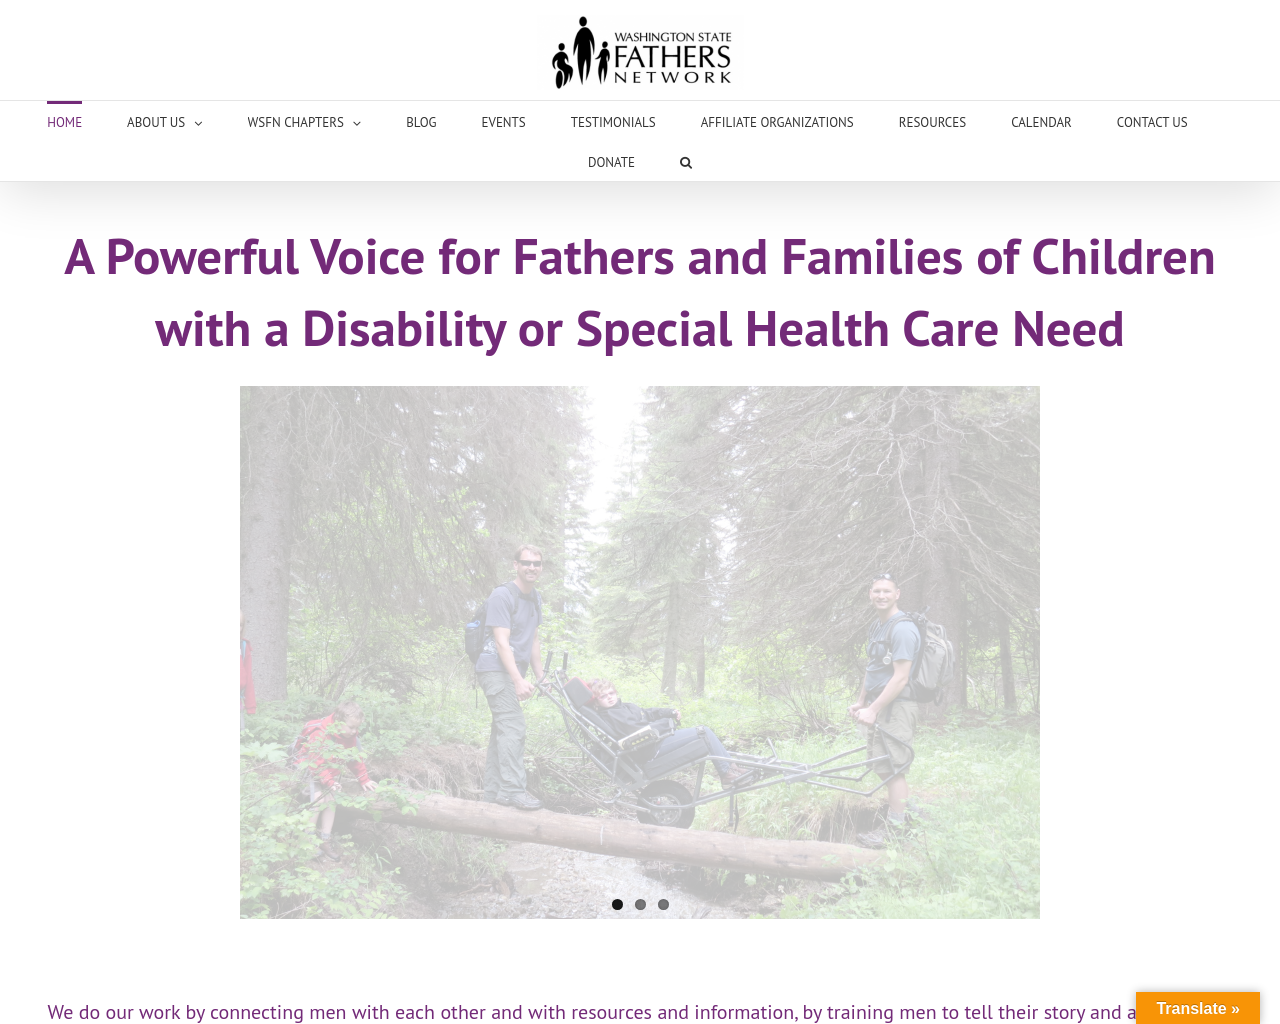 fathersnetwork.org